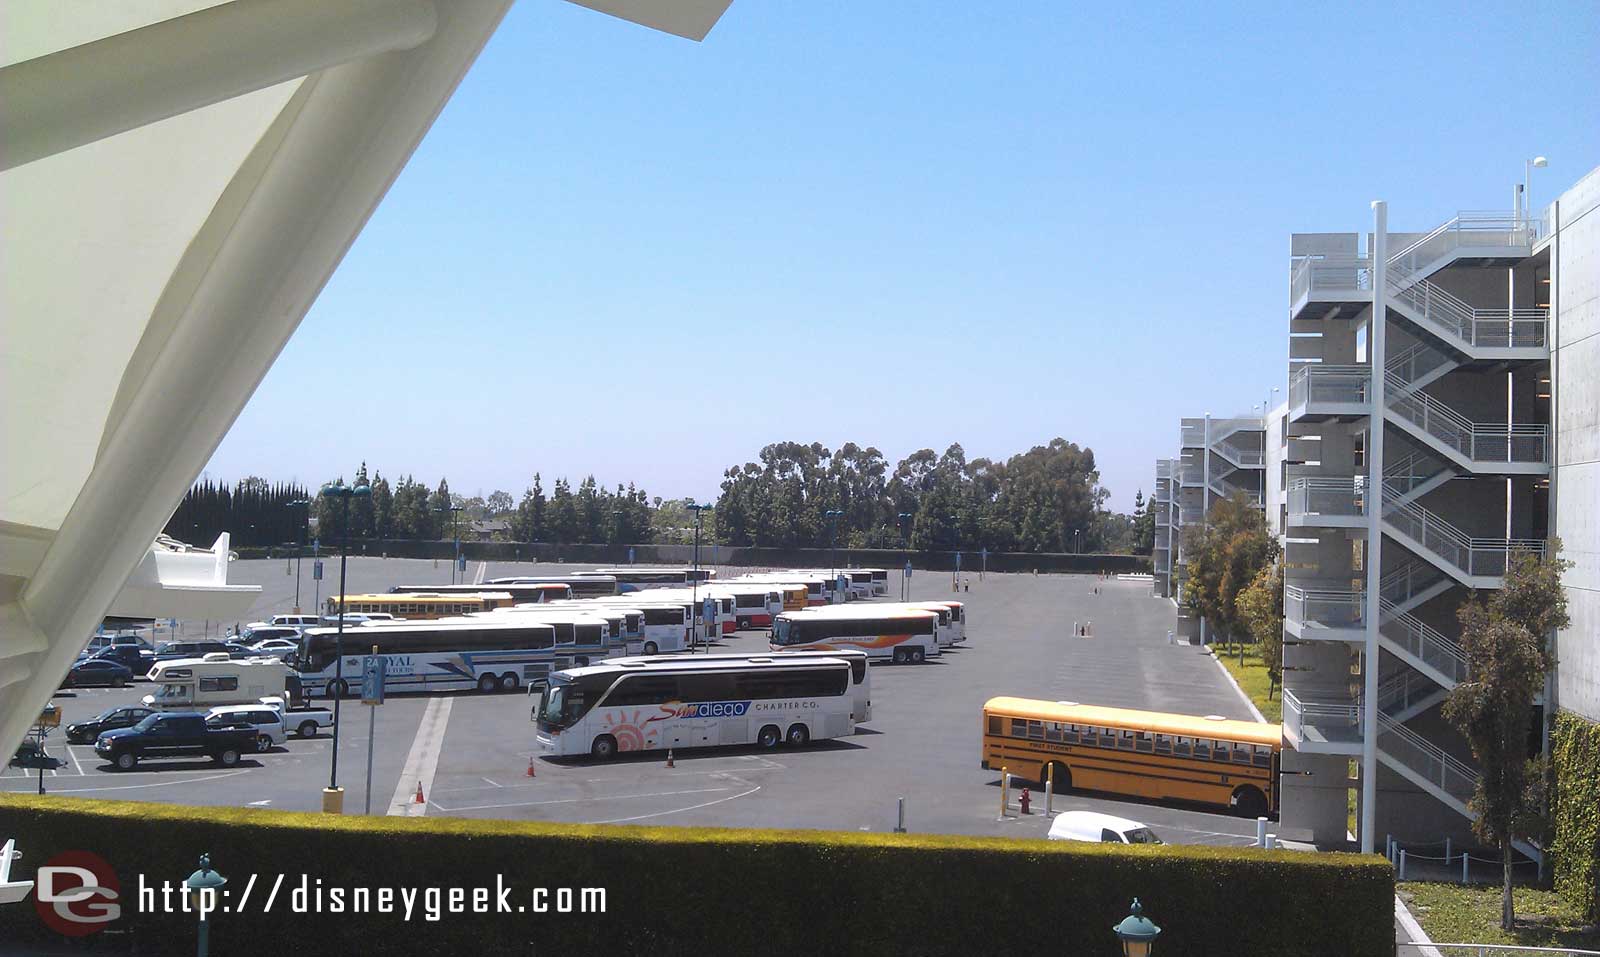 Just arrived at the Disneyland Resort for the afternoonevening. Not that many buses in the lot yet.